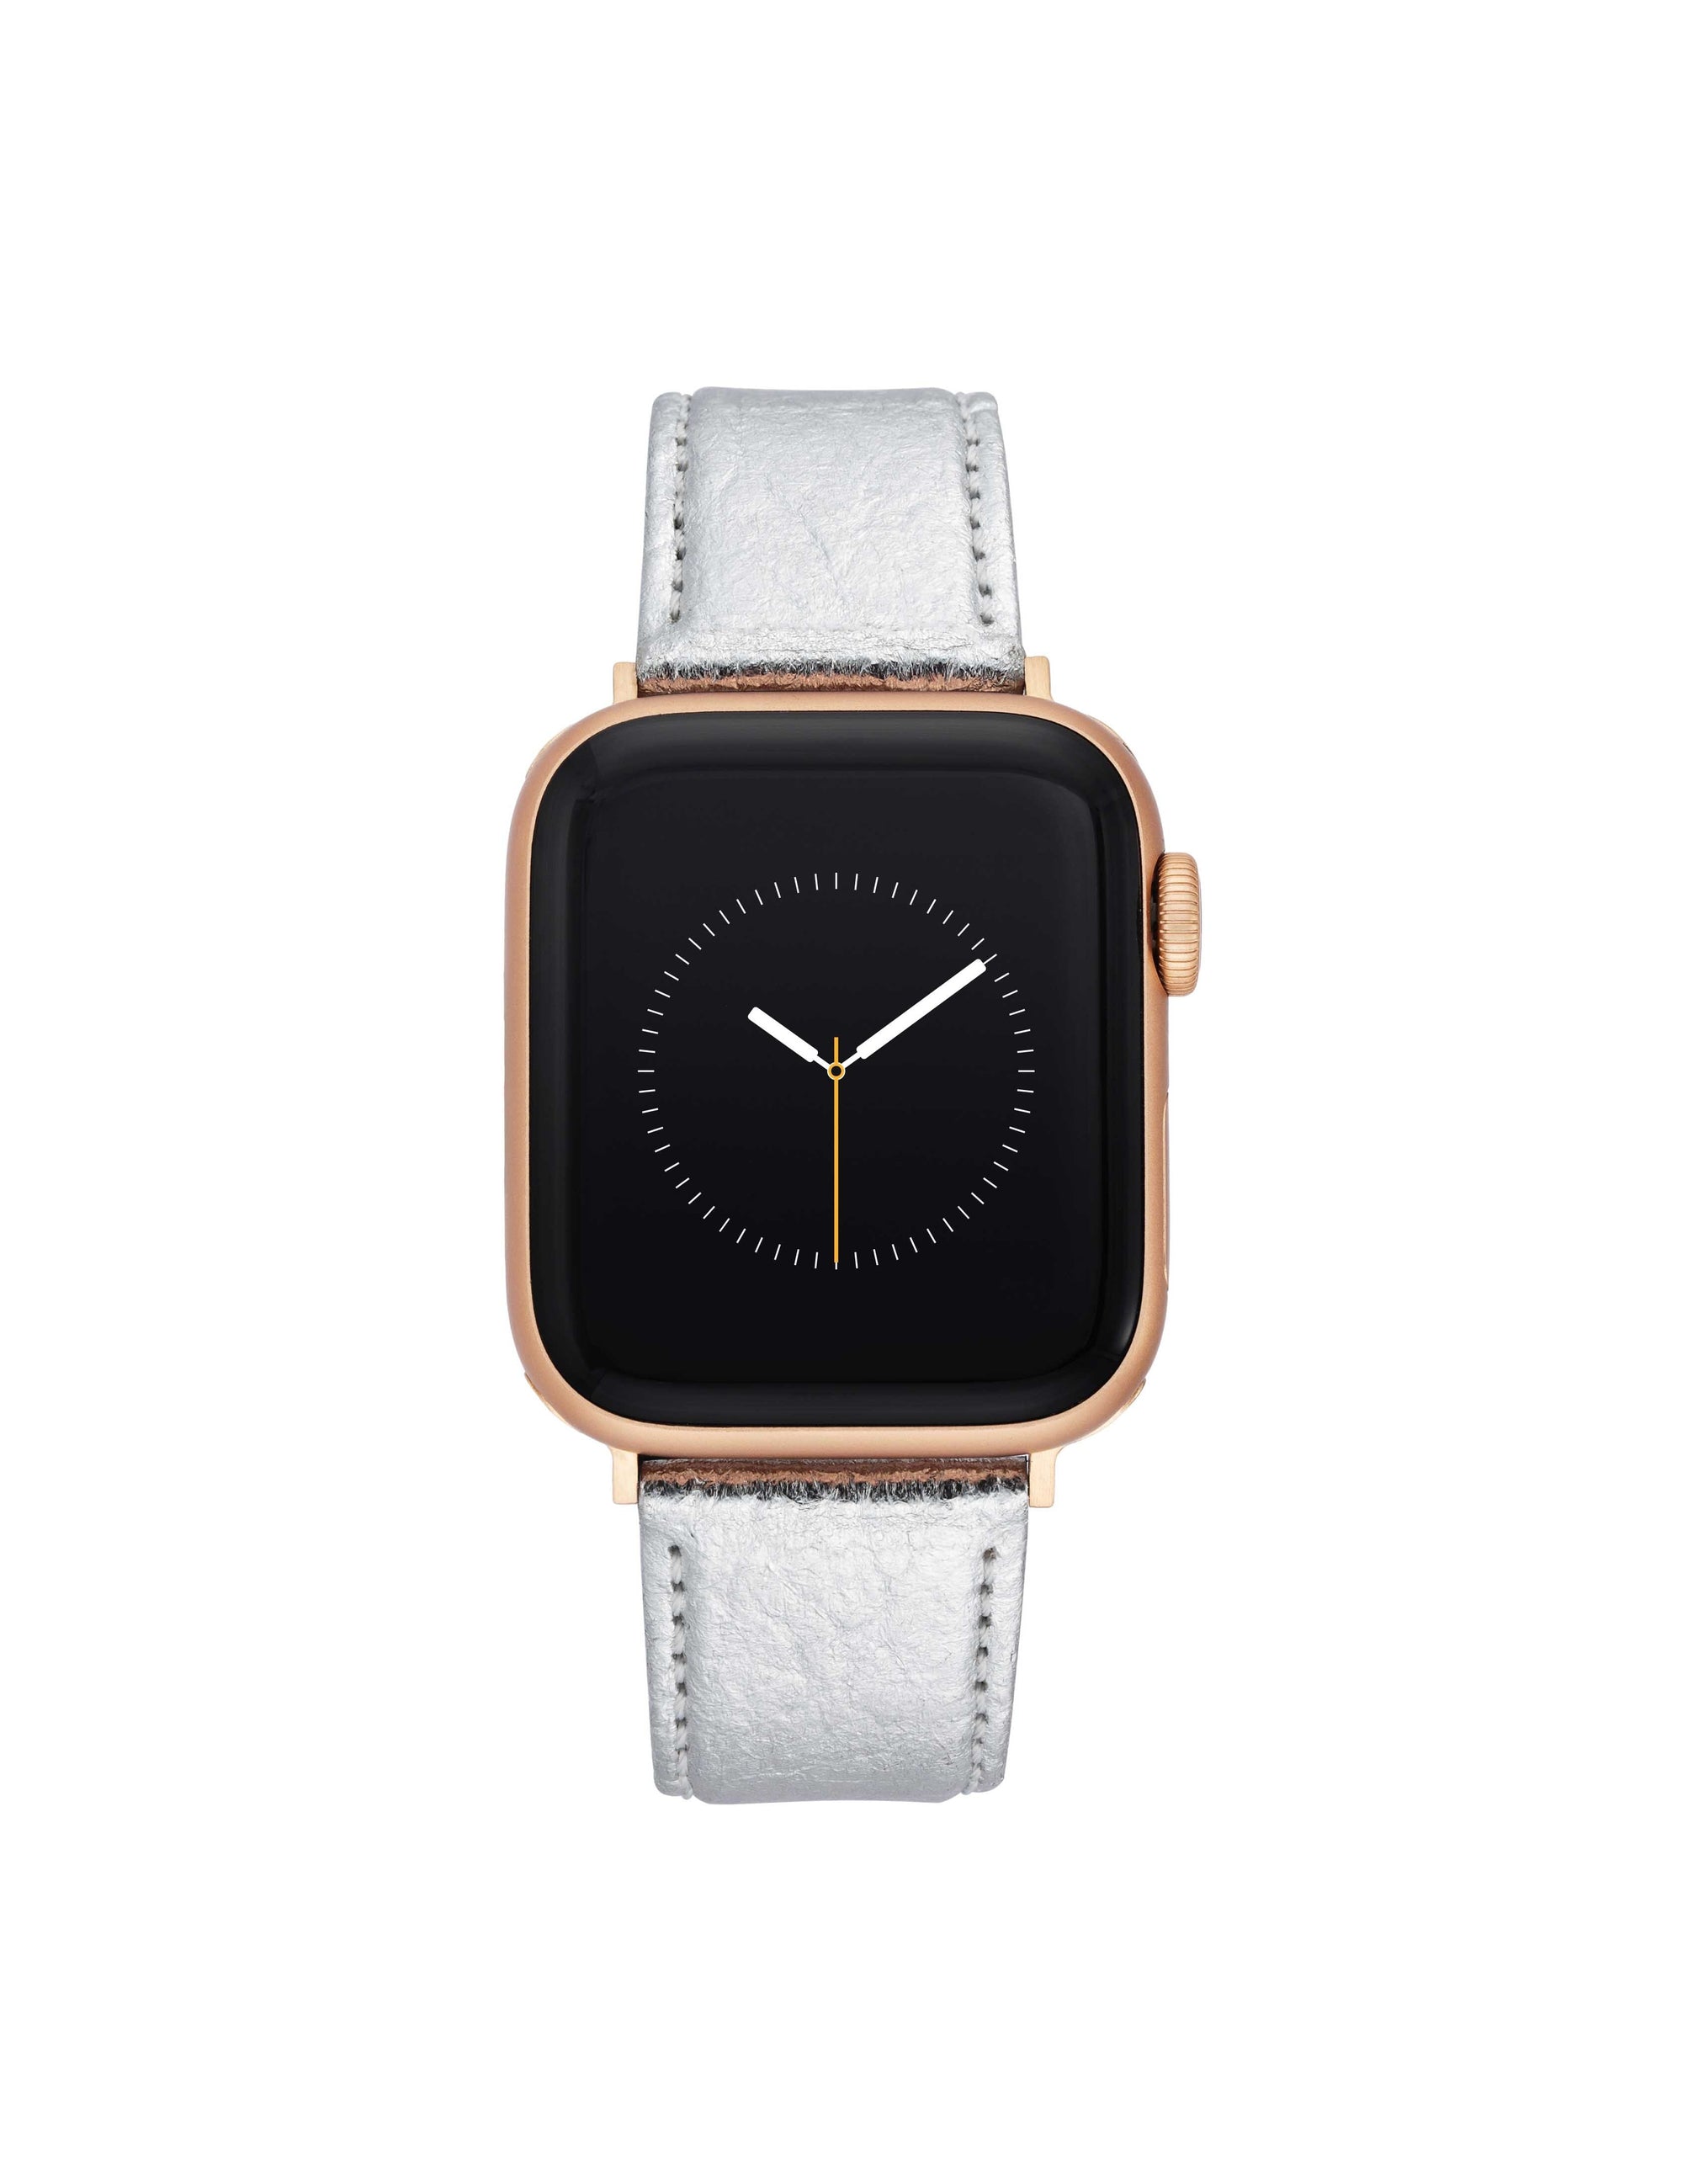 Anne Klein Silver/Rose Gold-Tone Consider It Pineapple Leather Band for Apple Watch¨